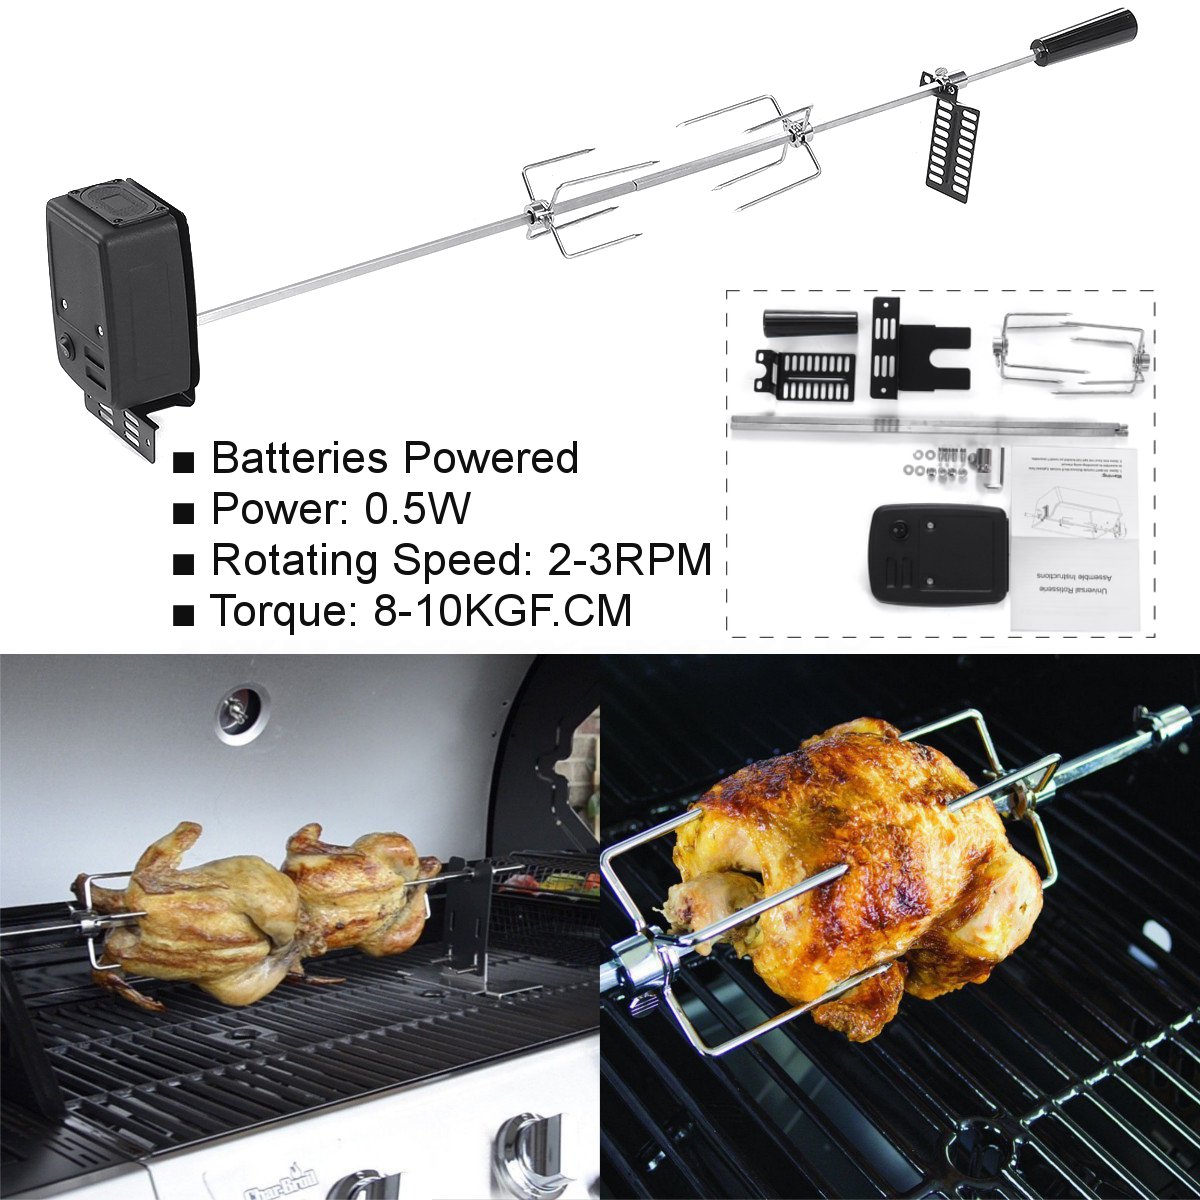 05W-Stainless-Steel-Rotisserie-BBQ-Grill-Roaster-Spit-Rod-Camping-Charcoal-Kits-1636668-1